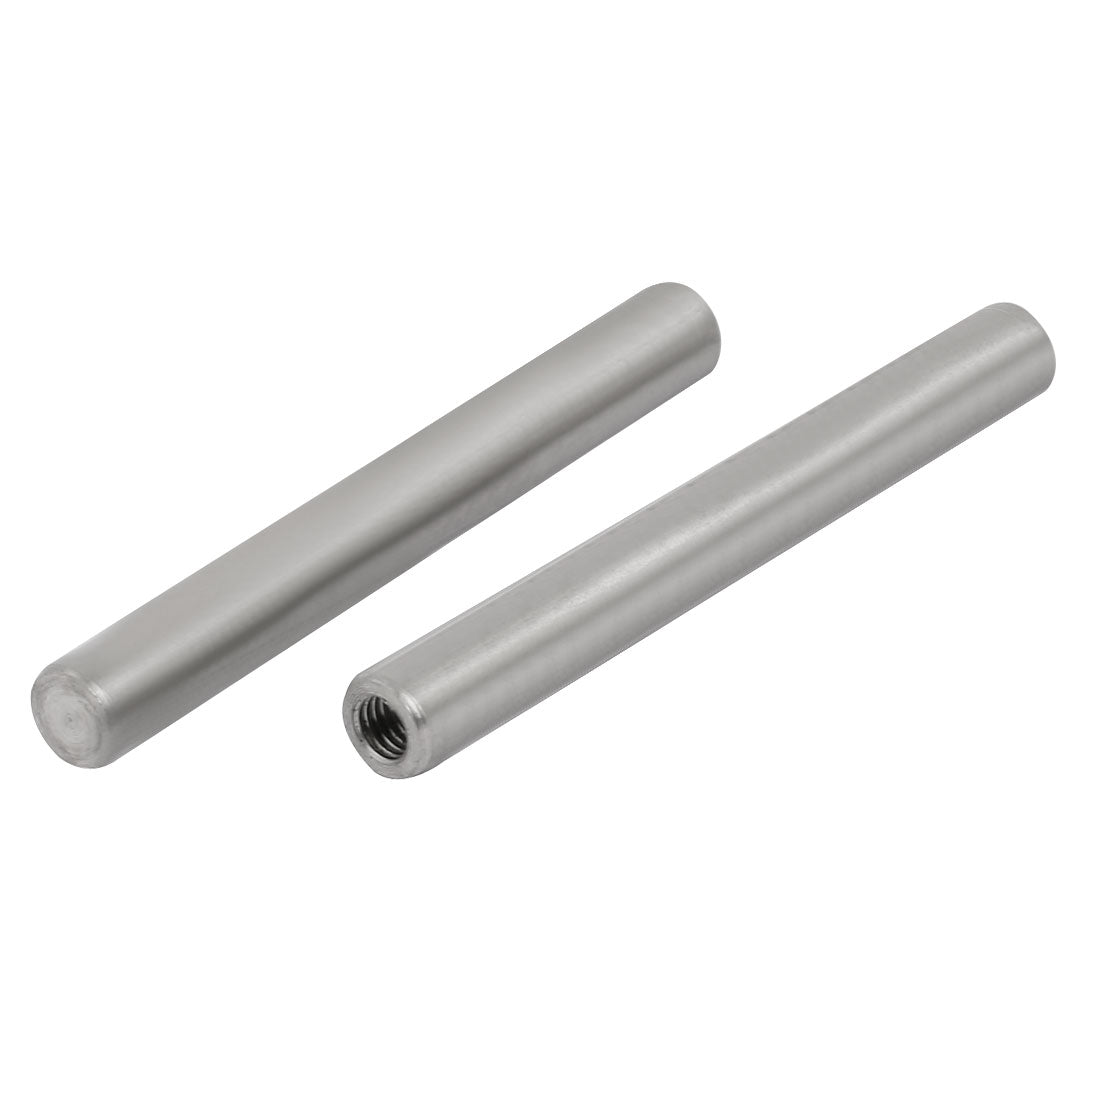 uxcell Uxcell 304 Stainless Steel M5 Female Thread 8mm x 70mm Cylindrical Dowel Pin 2pcs